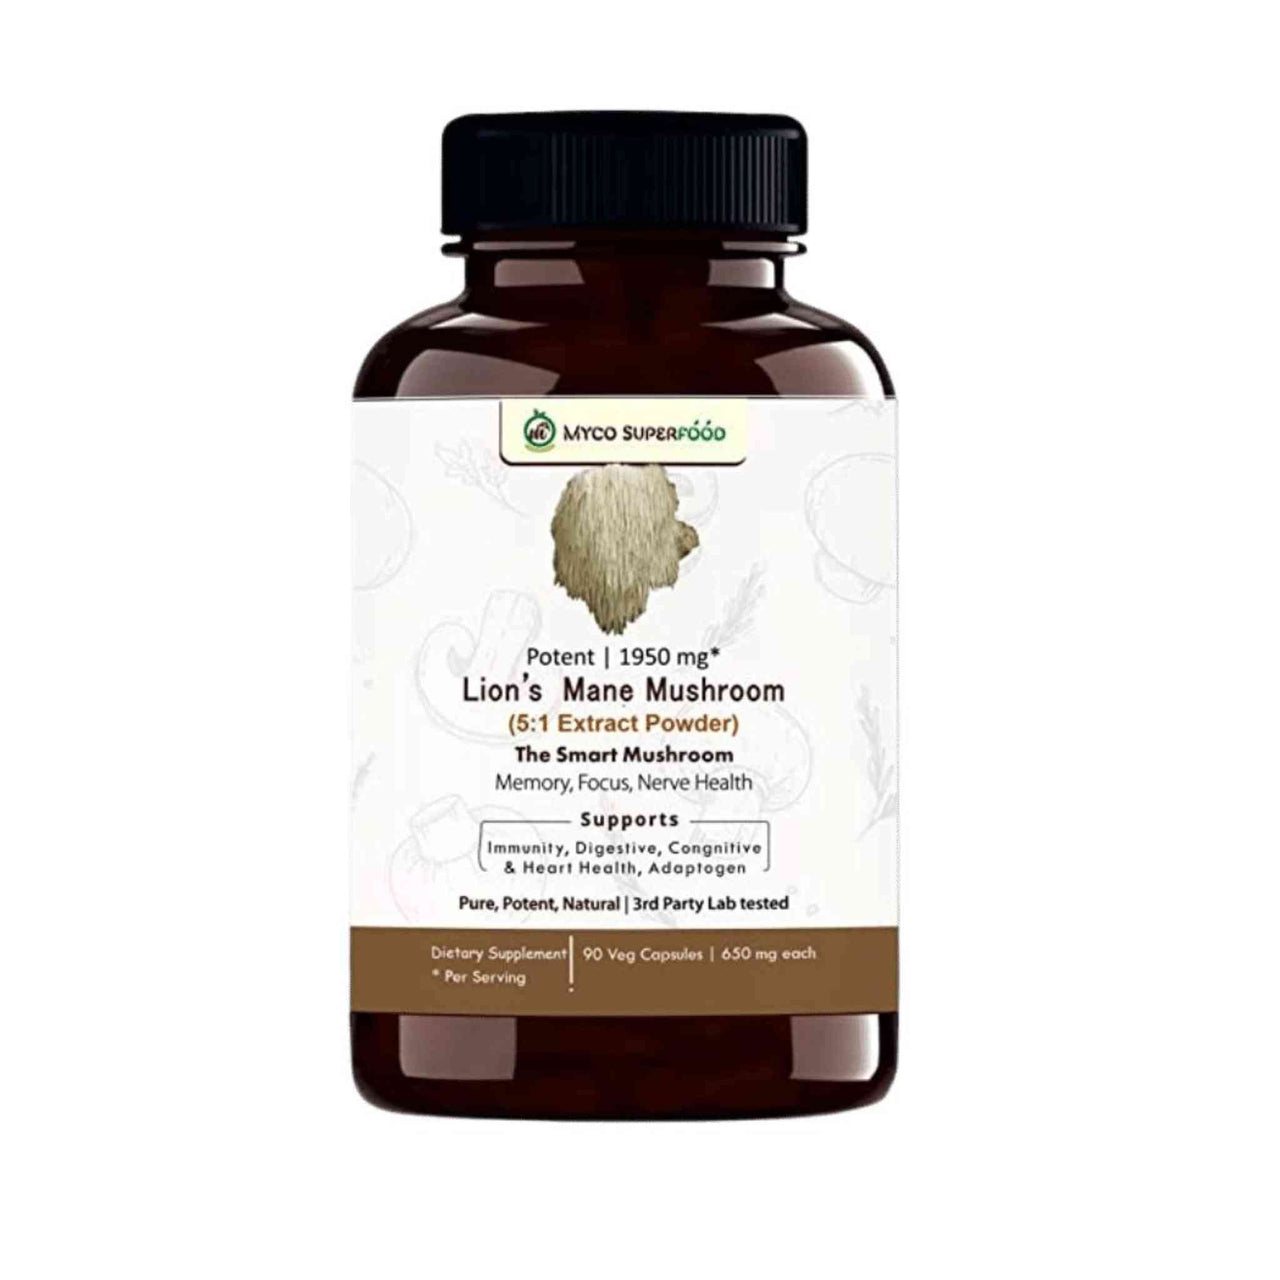 MYCO SUPERFOOD Lion's Mane Mushroom Extract Powder Capsules | For Memory, Focus, Clarity